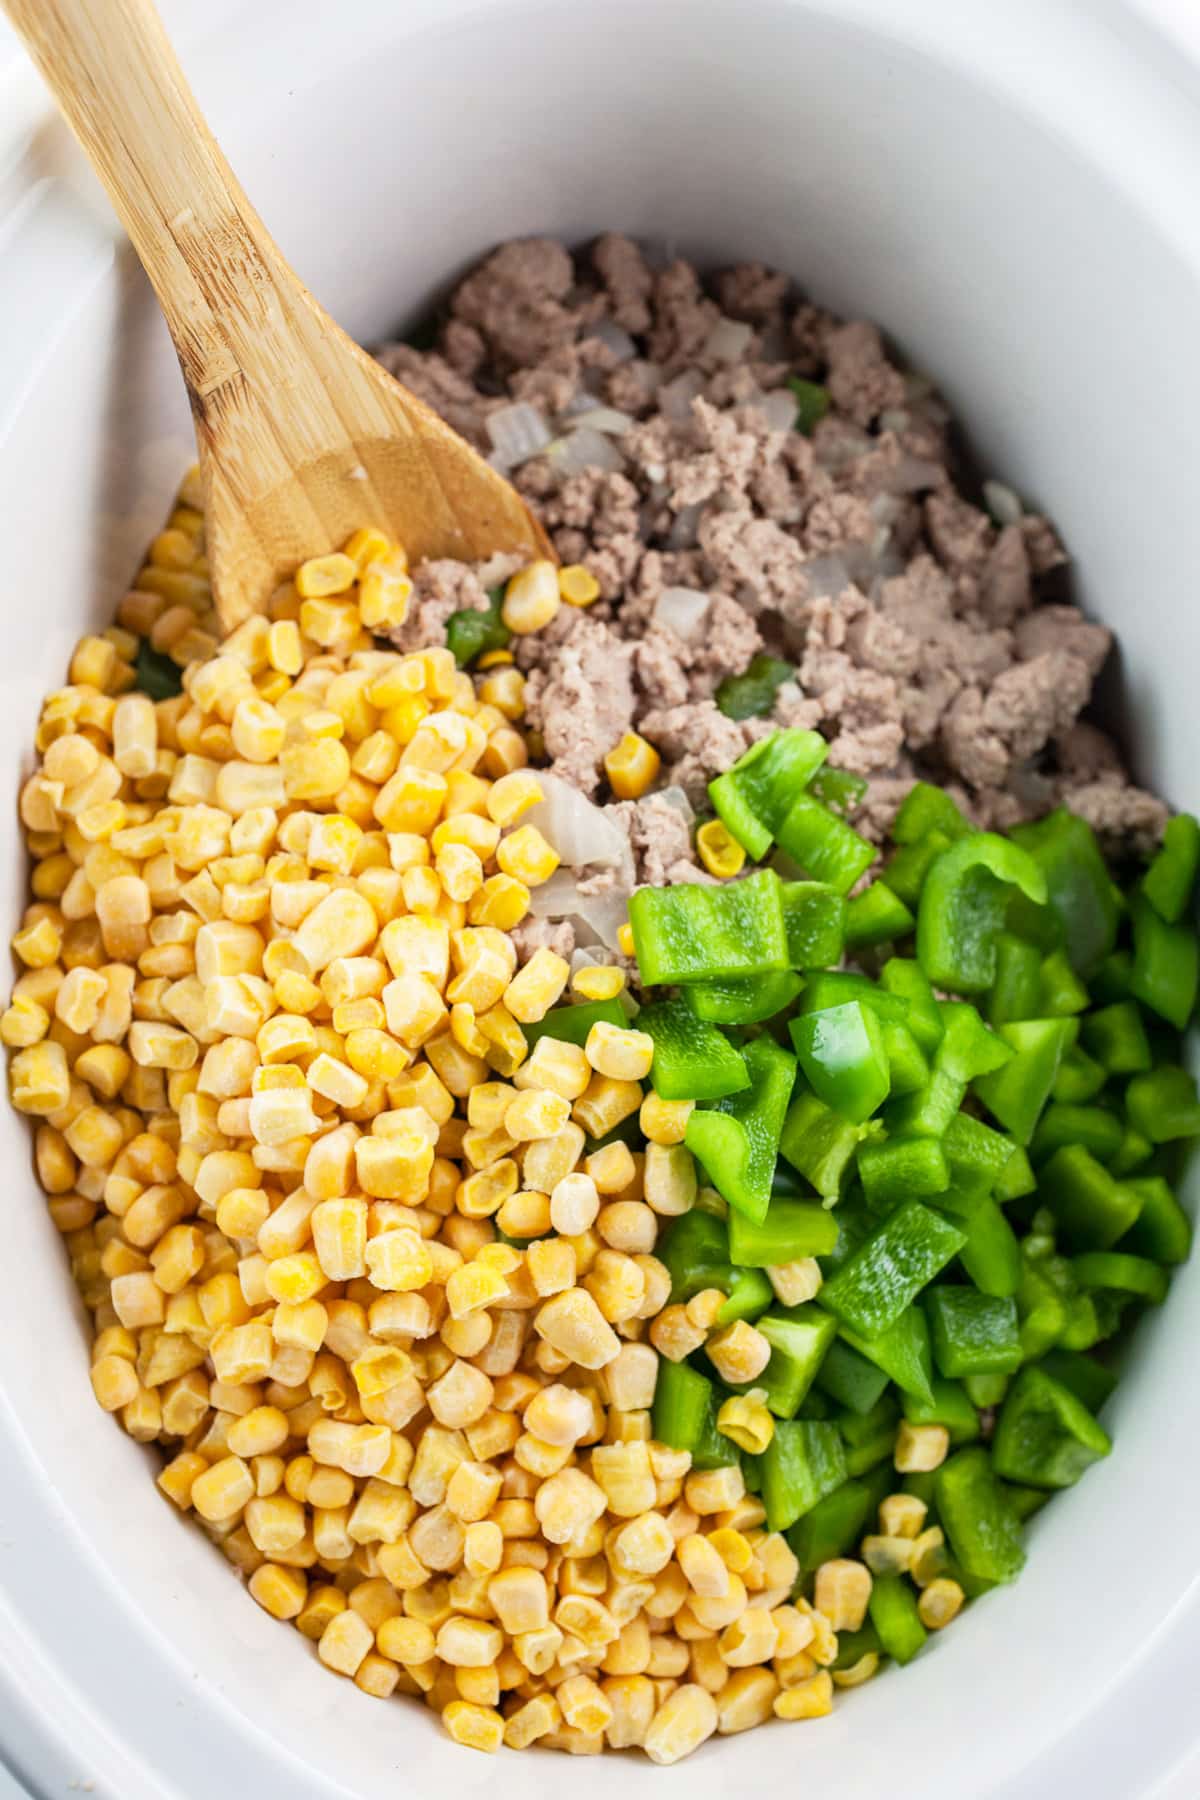 Cooked ground turkey, frozen corn, and diced green bell peppers in slow cooker.